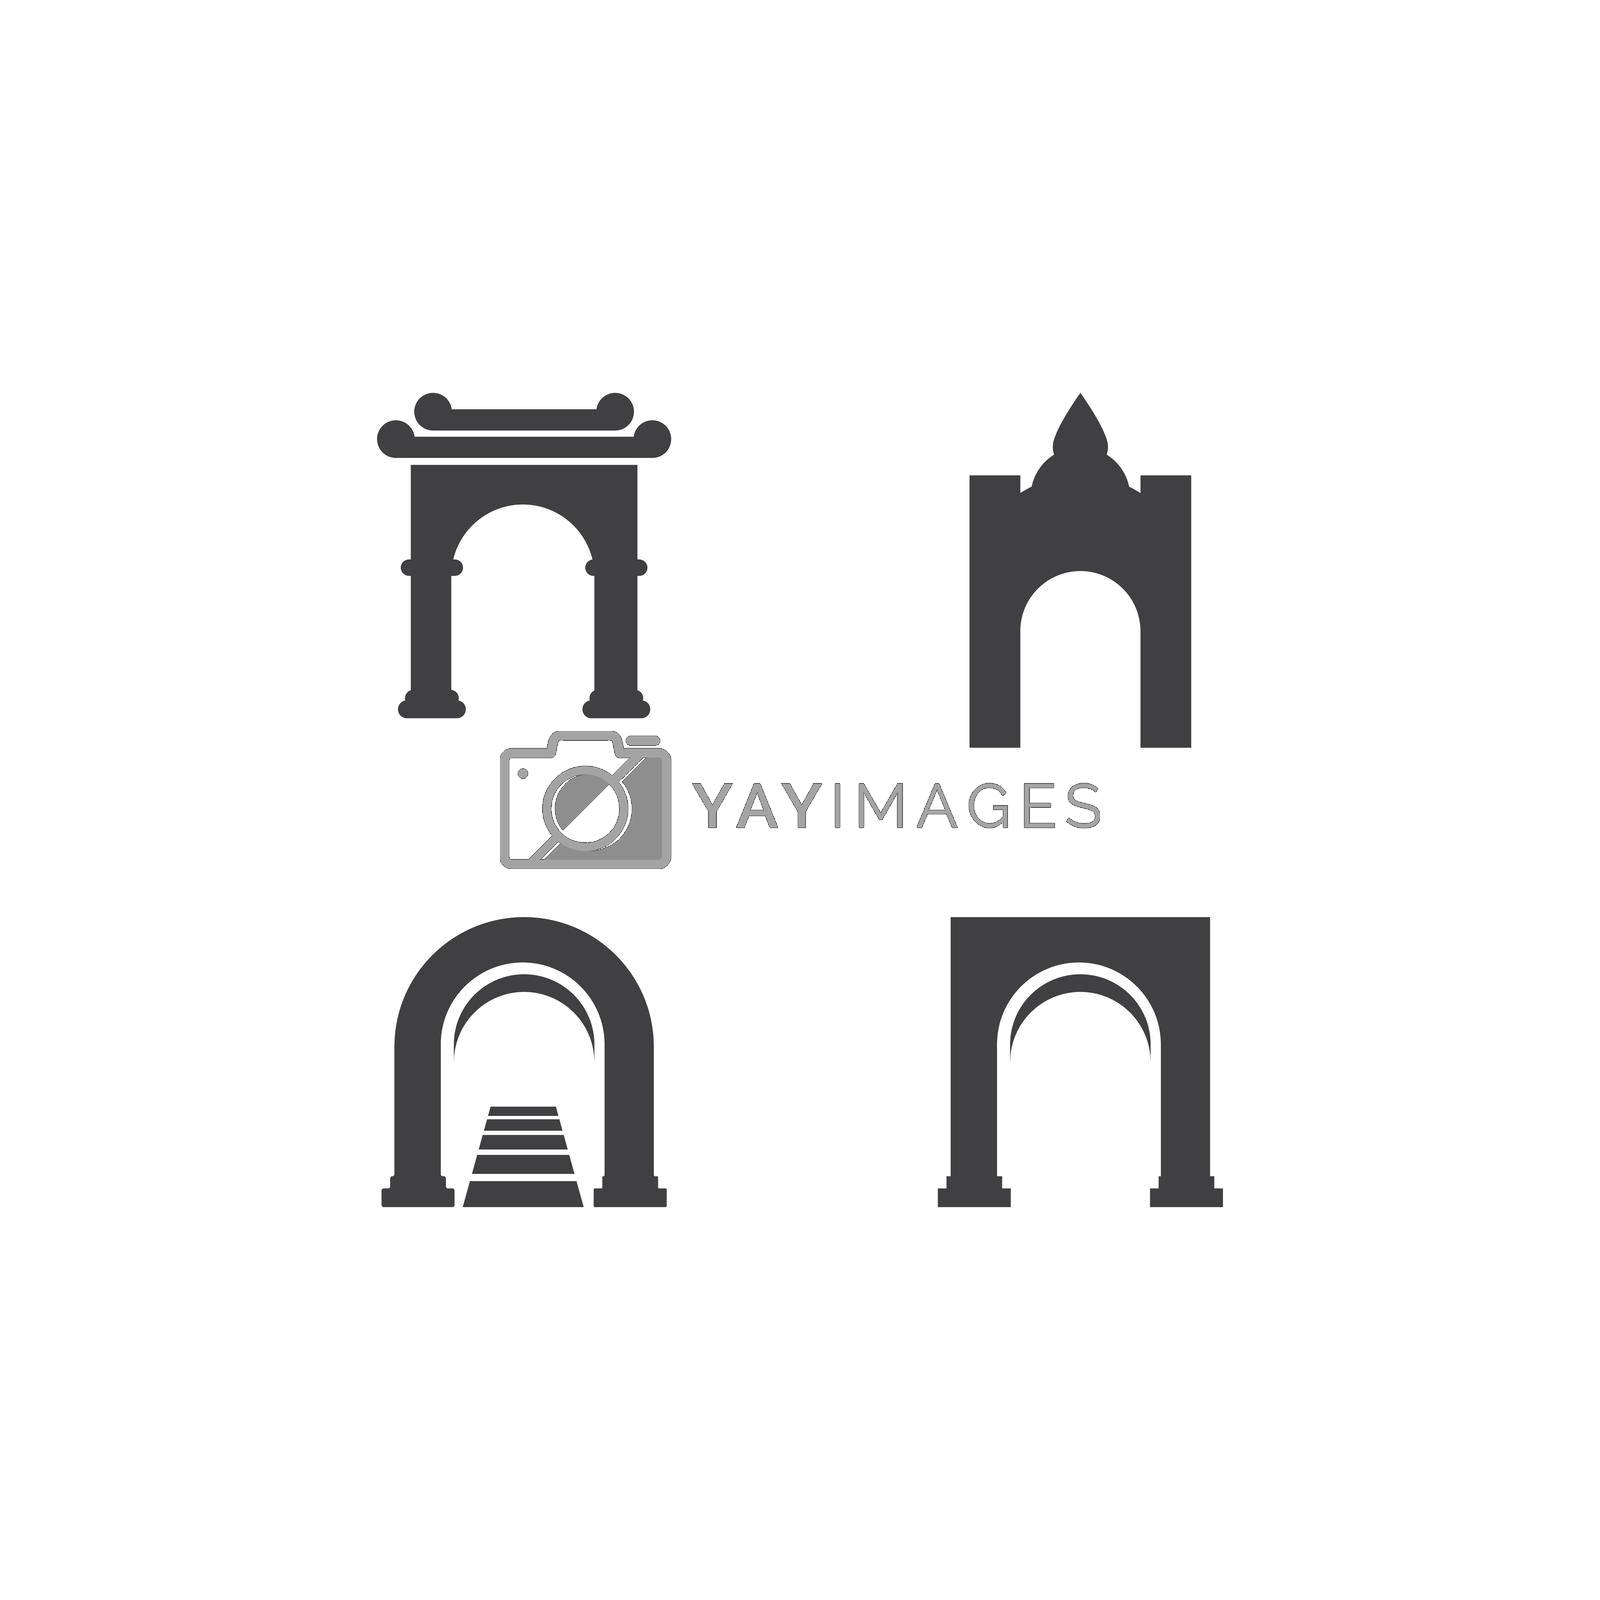 Royalty free image of Gate illustration vector by awk